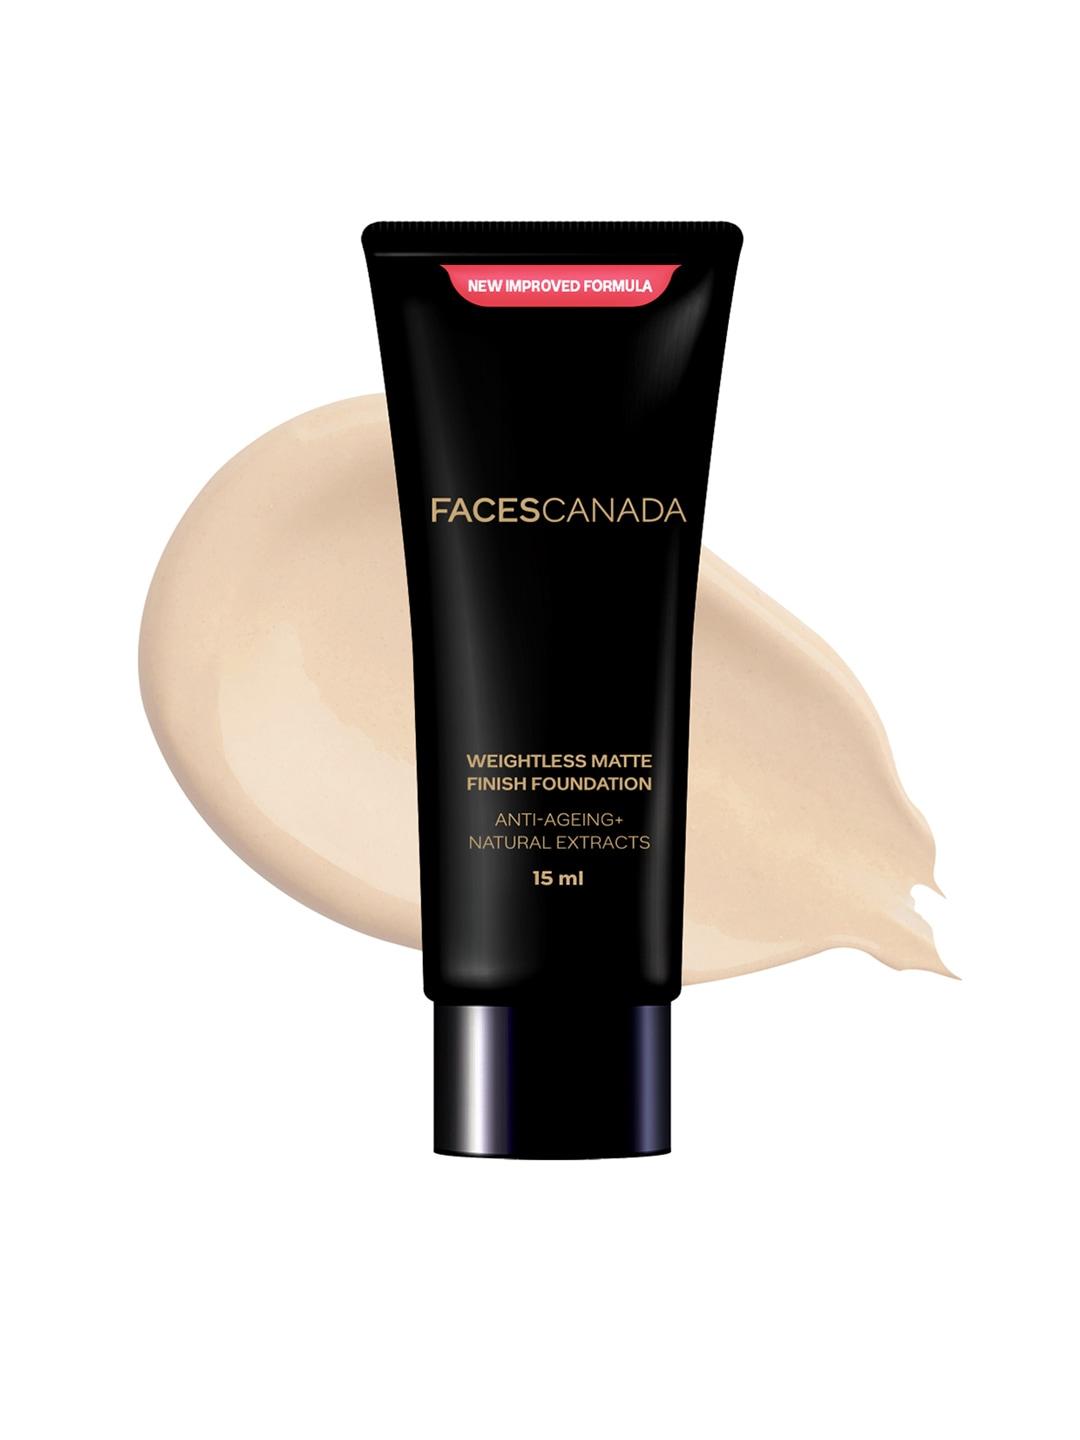 faces canada weightless matte foundation with grape extracts & shea butter 18ml - ivory 01